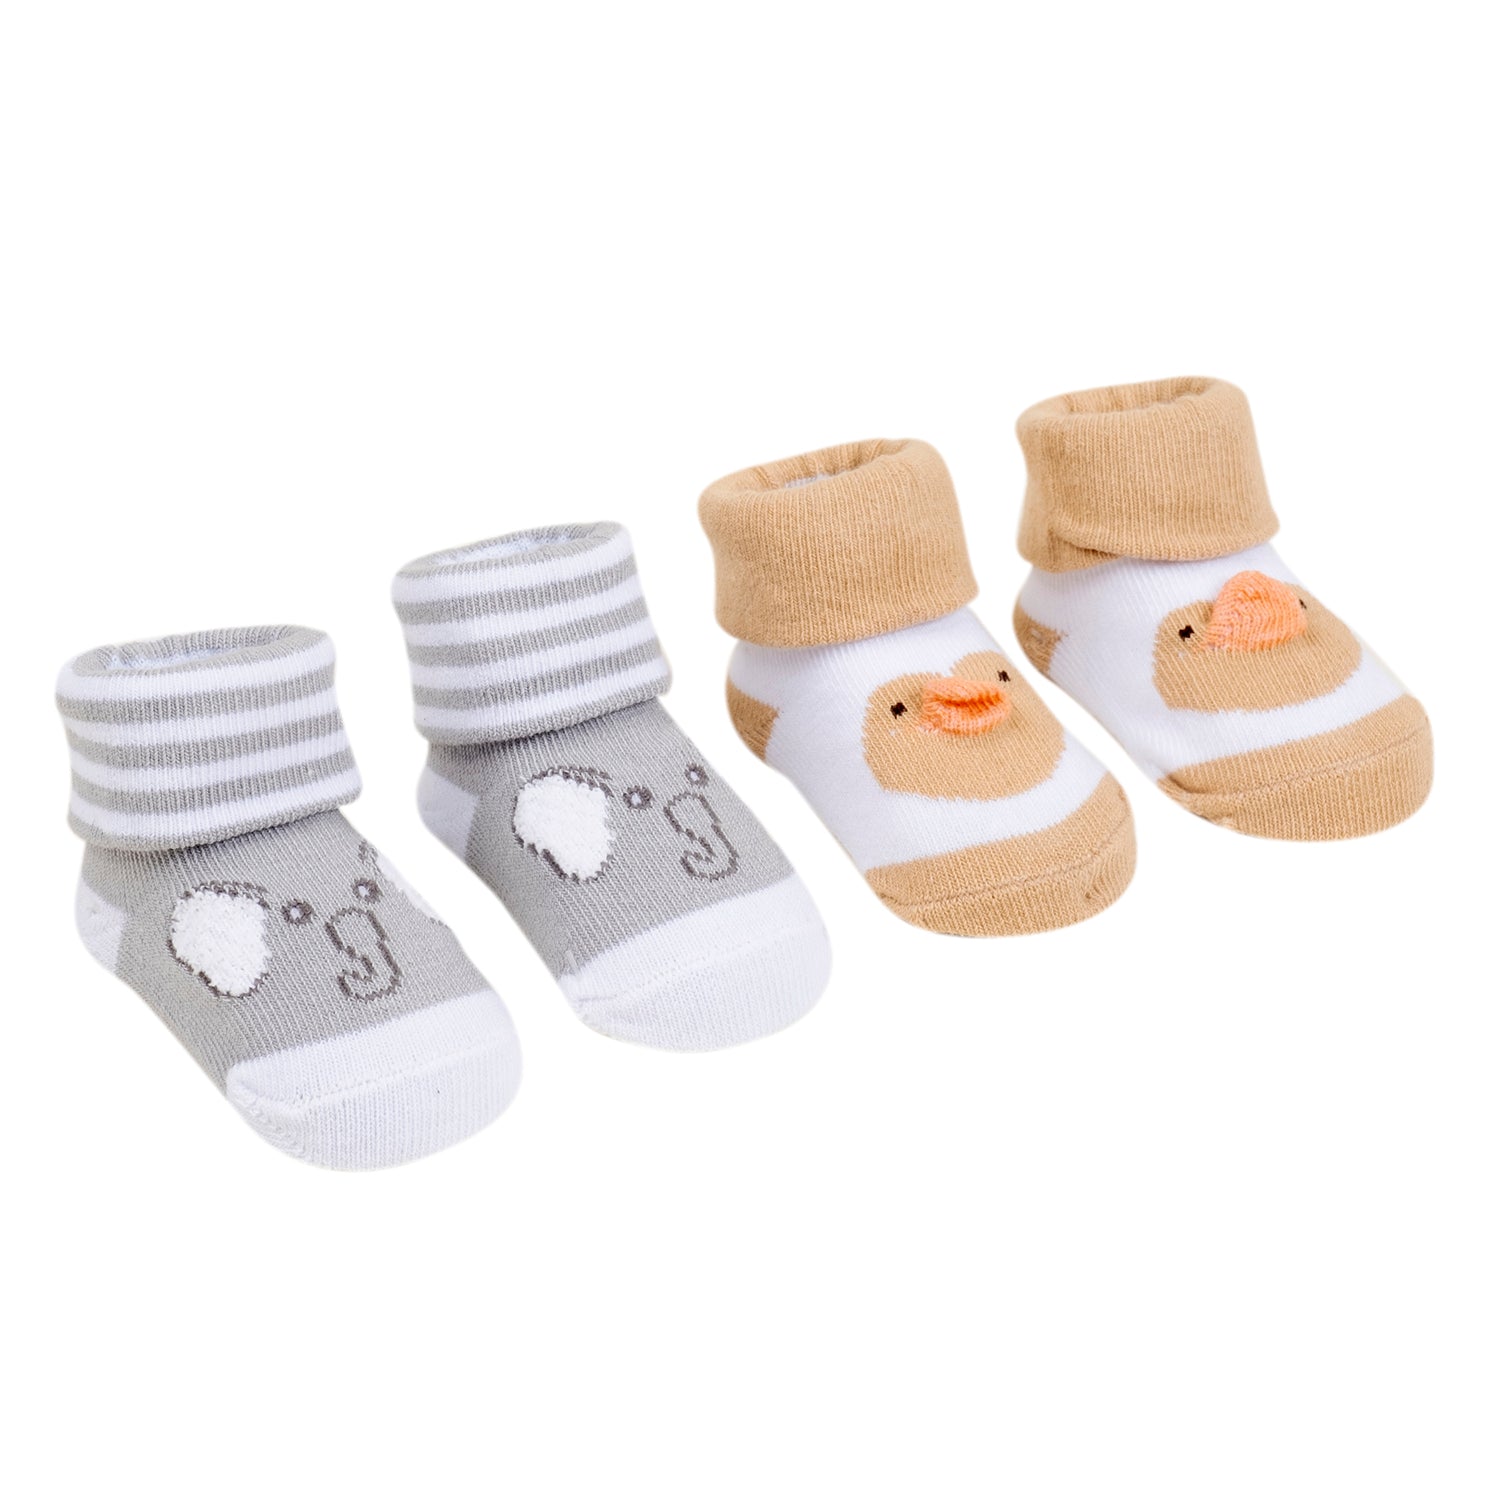 Baby Moo 3D Elephant Chick Cotton Ankle Length Infant Dress Up Walking Set of 2 Socks Booties - Beige